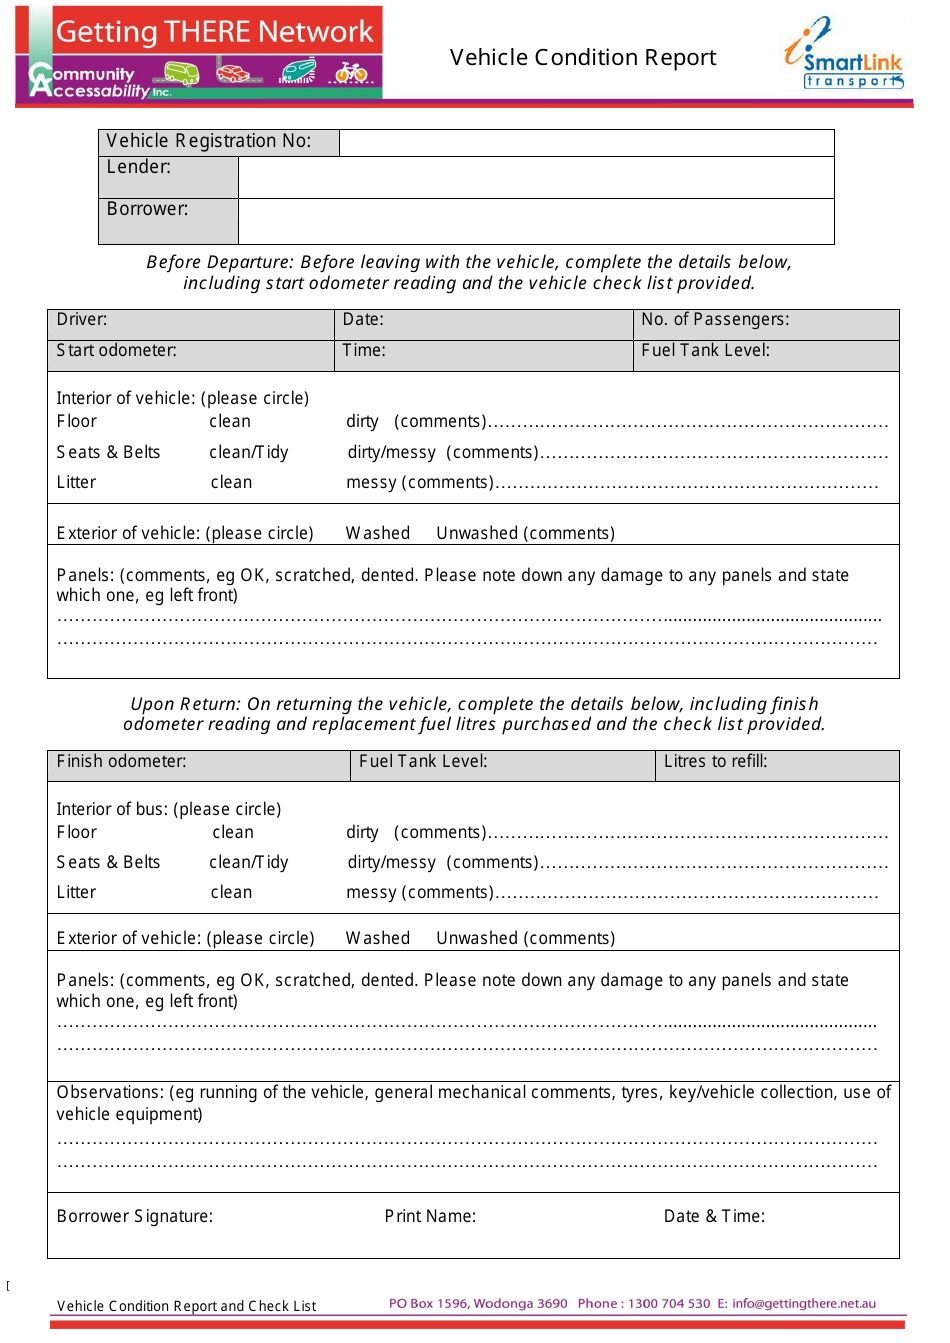 Vehicle Condition Report Template - Smartlink Transport, Page 1